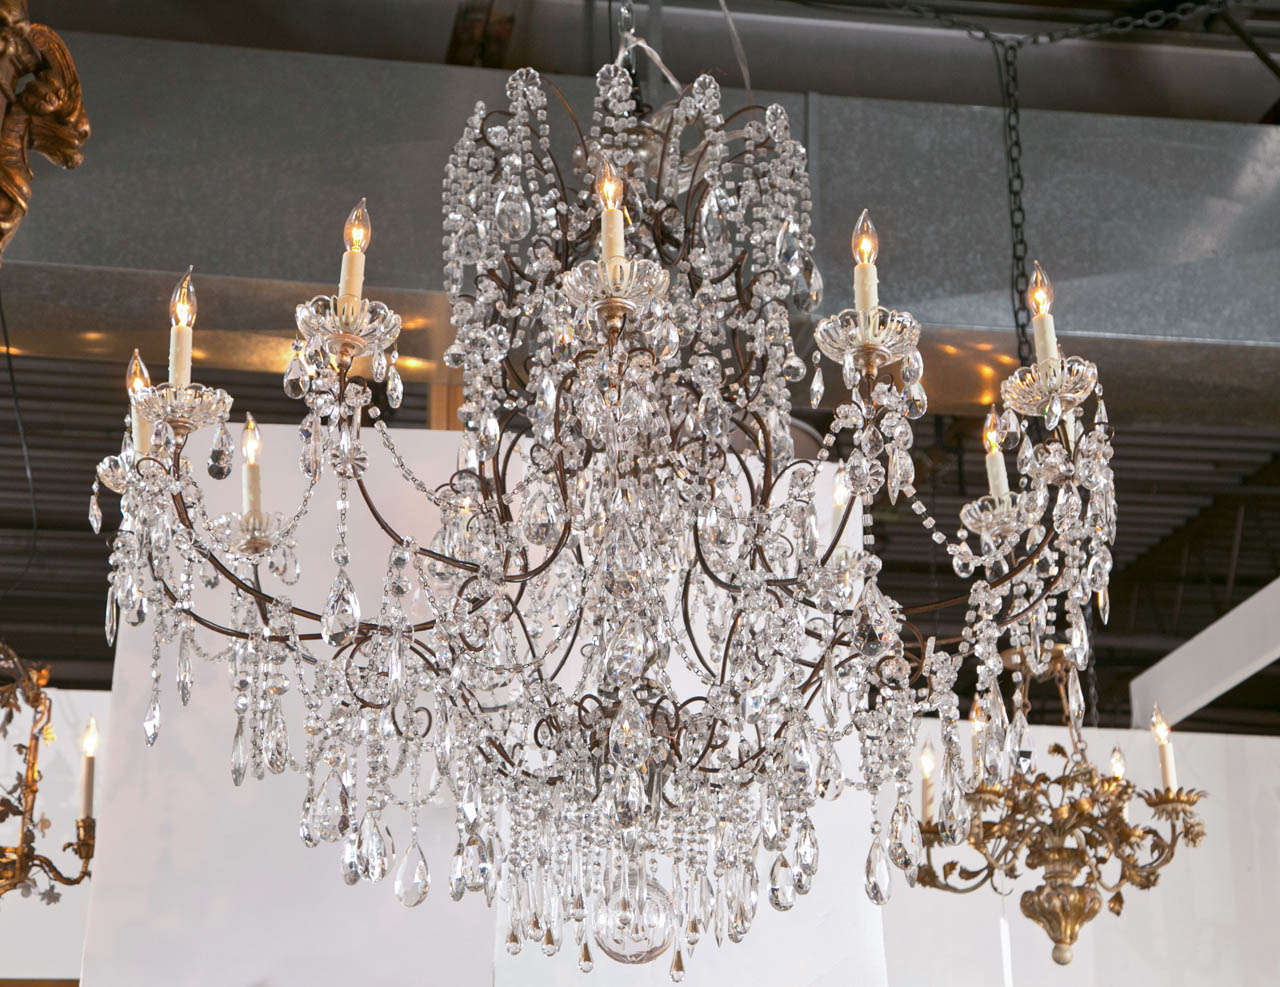 An Italian 12 light grand ballroom crystal chandelier with a carved and gilt center shaft and shaped iron arms. Retains most of its original crystal. Newly rewired.